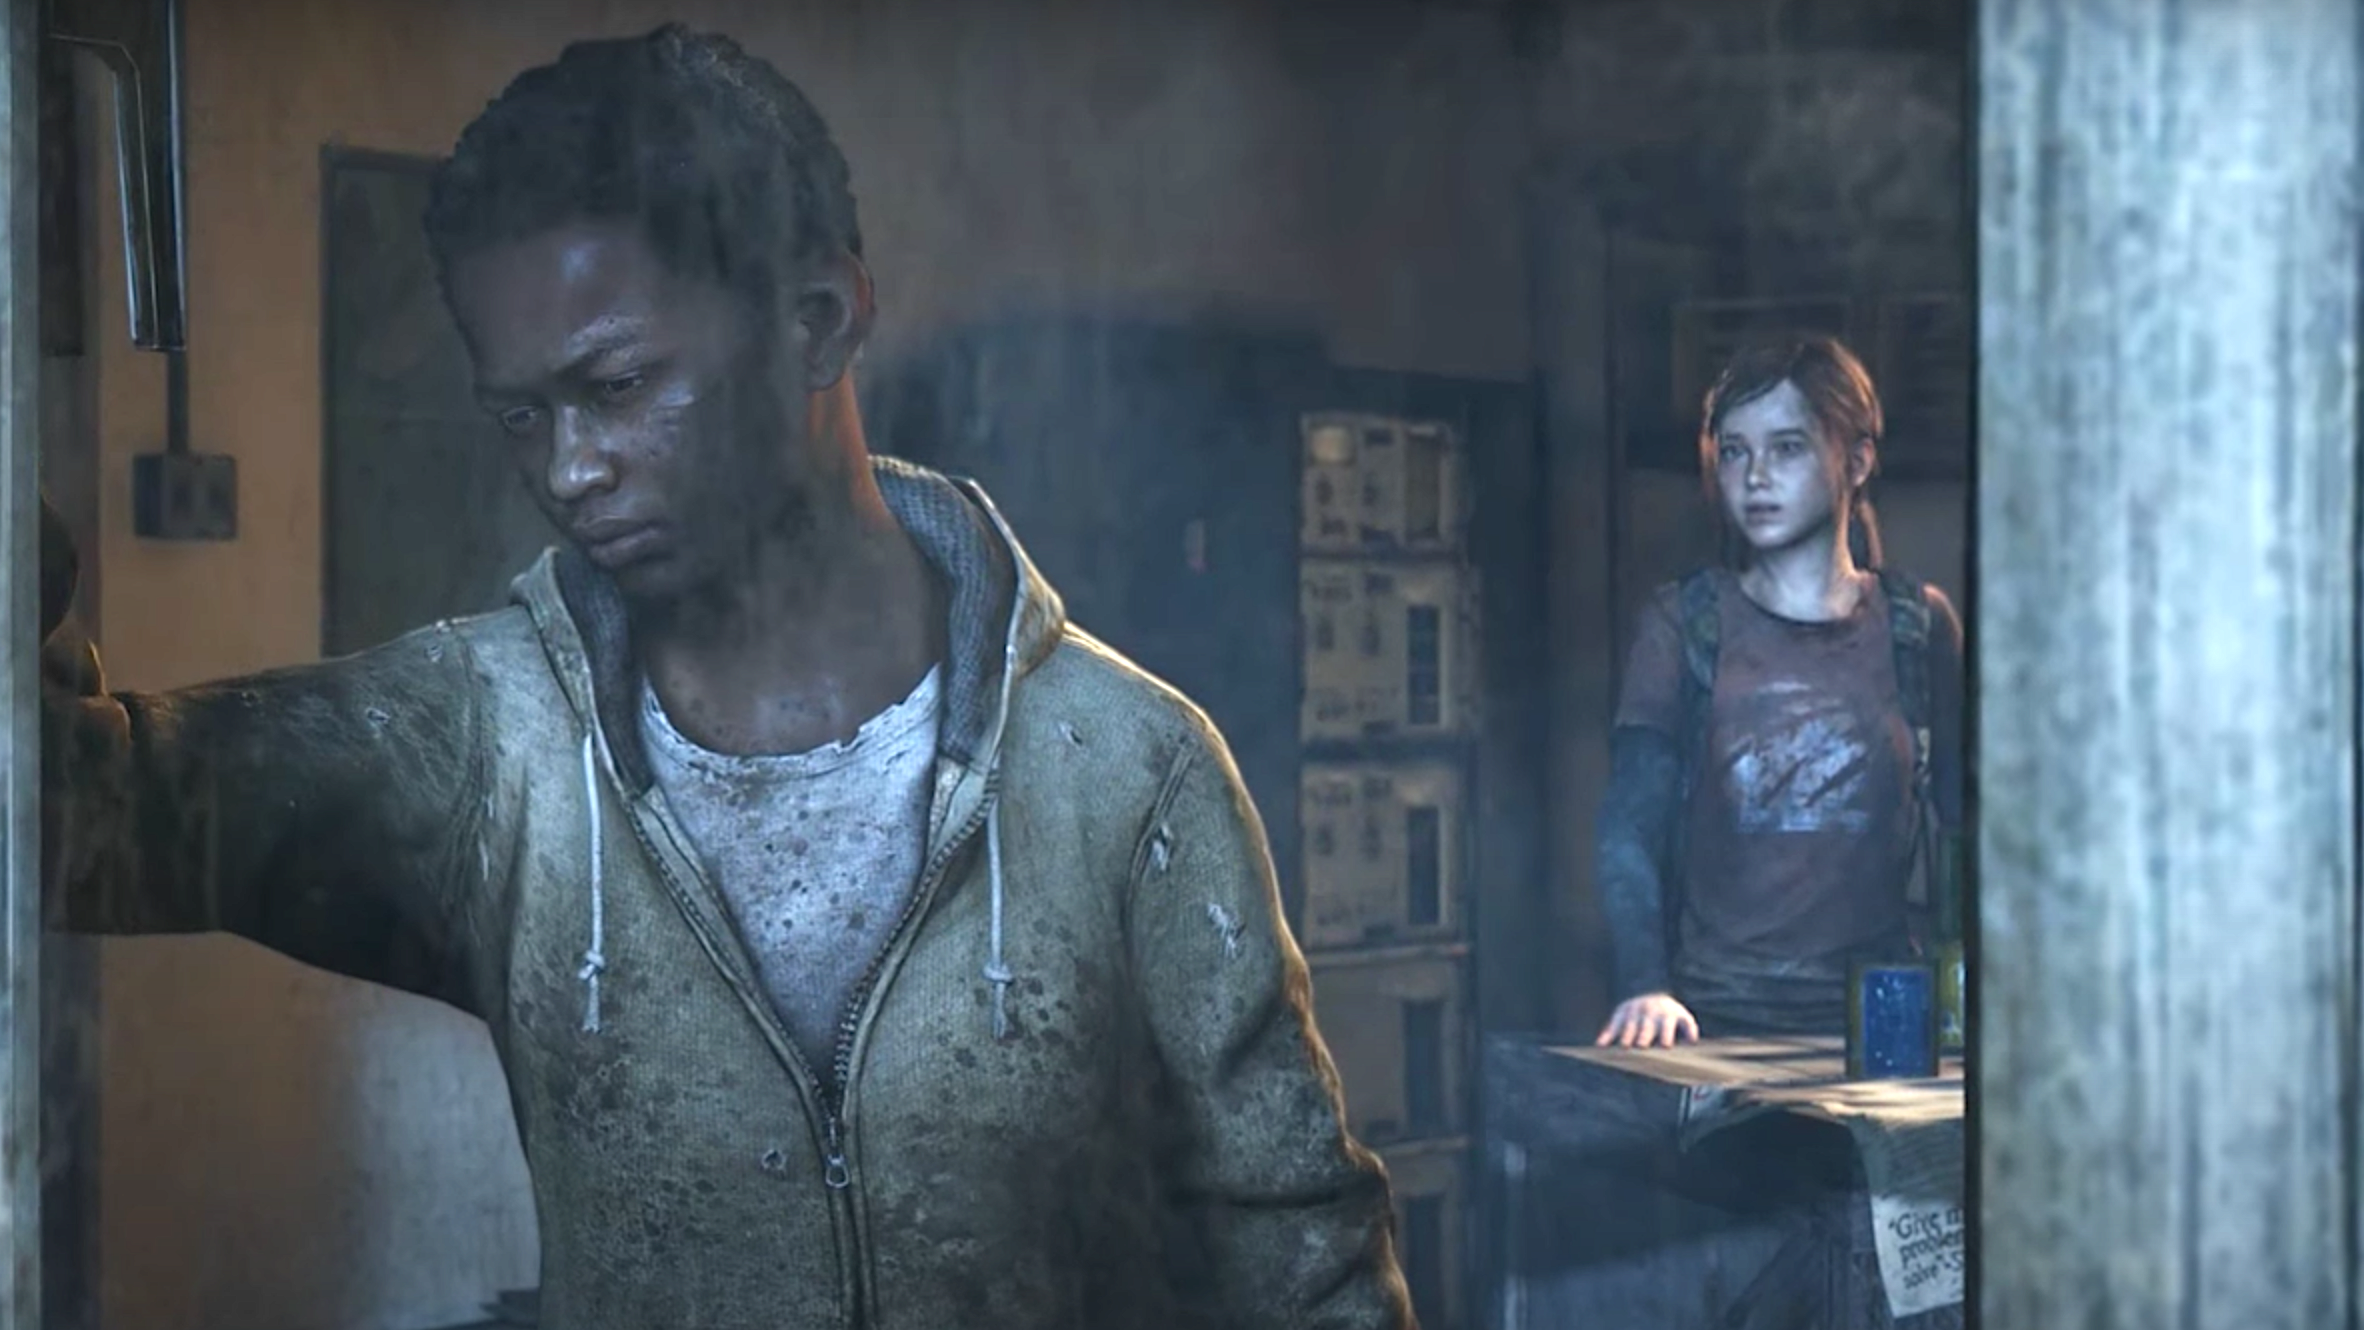 The Last of Us Part 2 on PC: all the rumors in one place